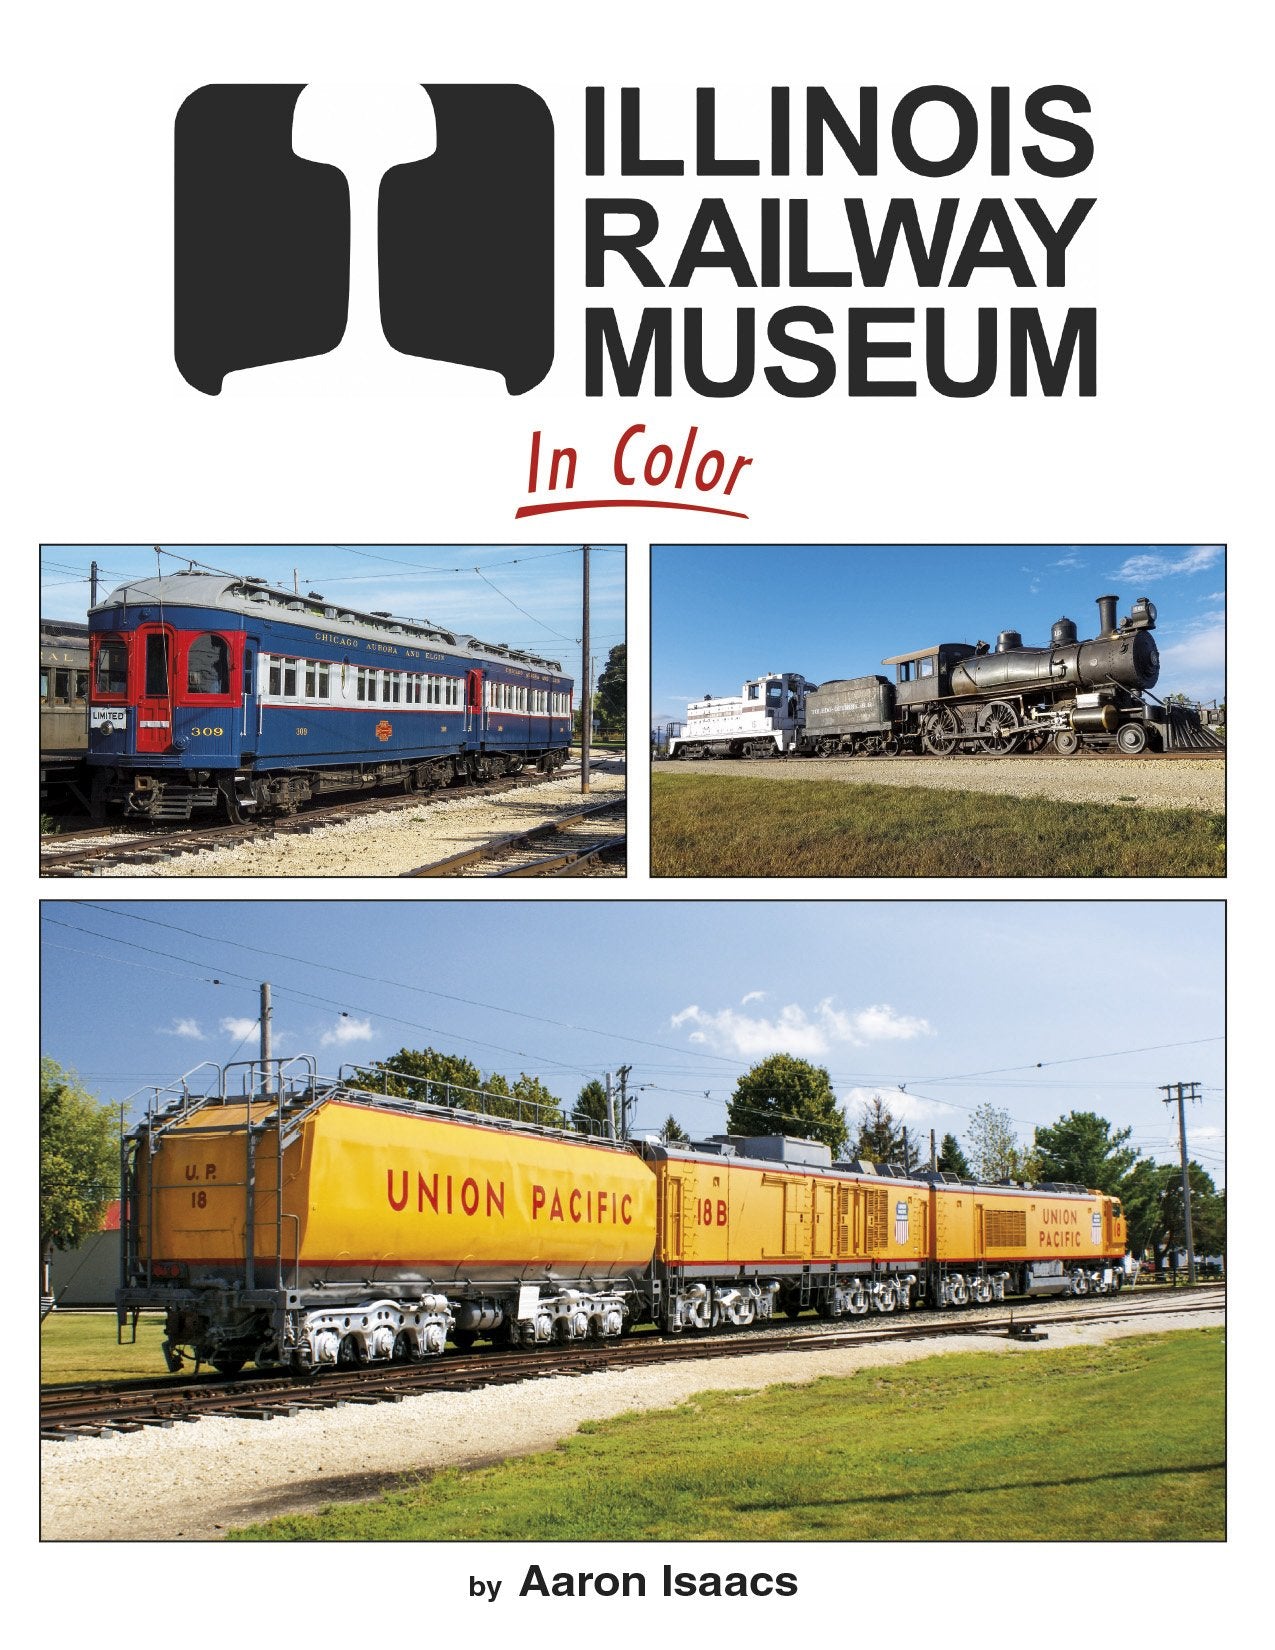 Morning Sun Books 1723 Illinois Railway Museum In Color by Aaron Isaacs